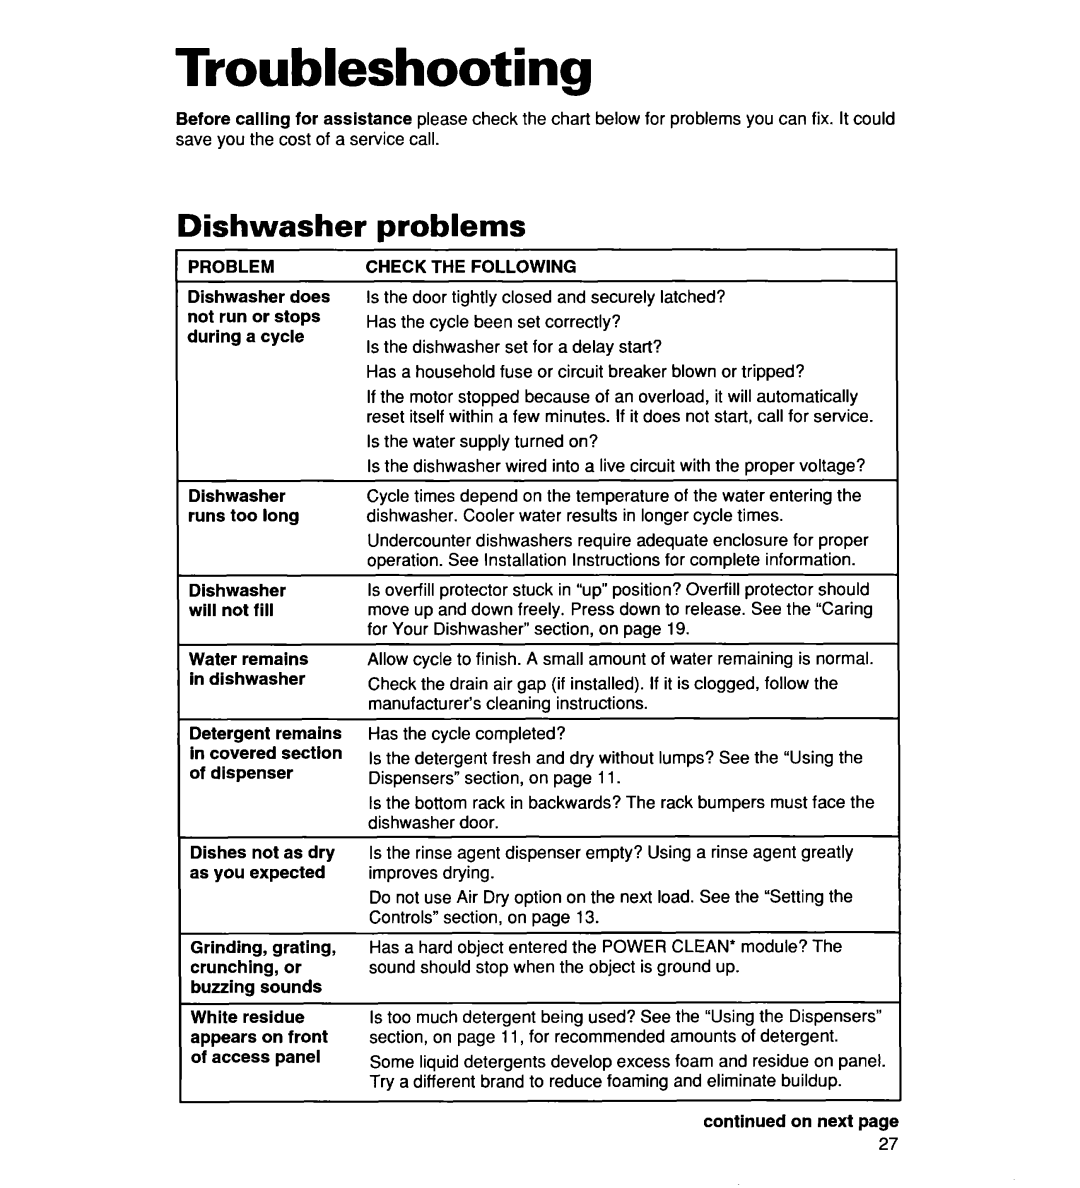 Whirlpool 935 Series Troubleshooting, problems, Dishwasher does not run or stops during a cycle, Check The Following 